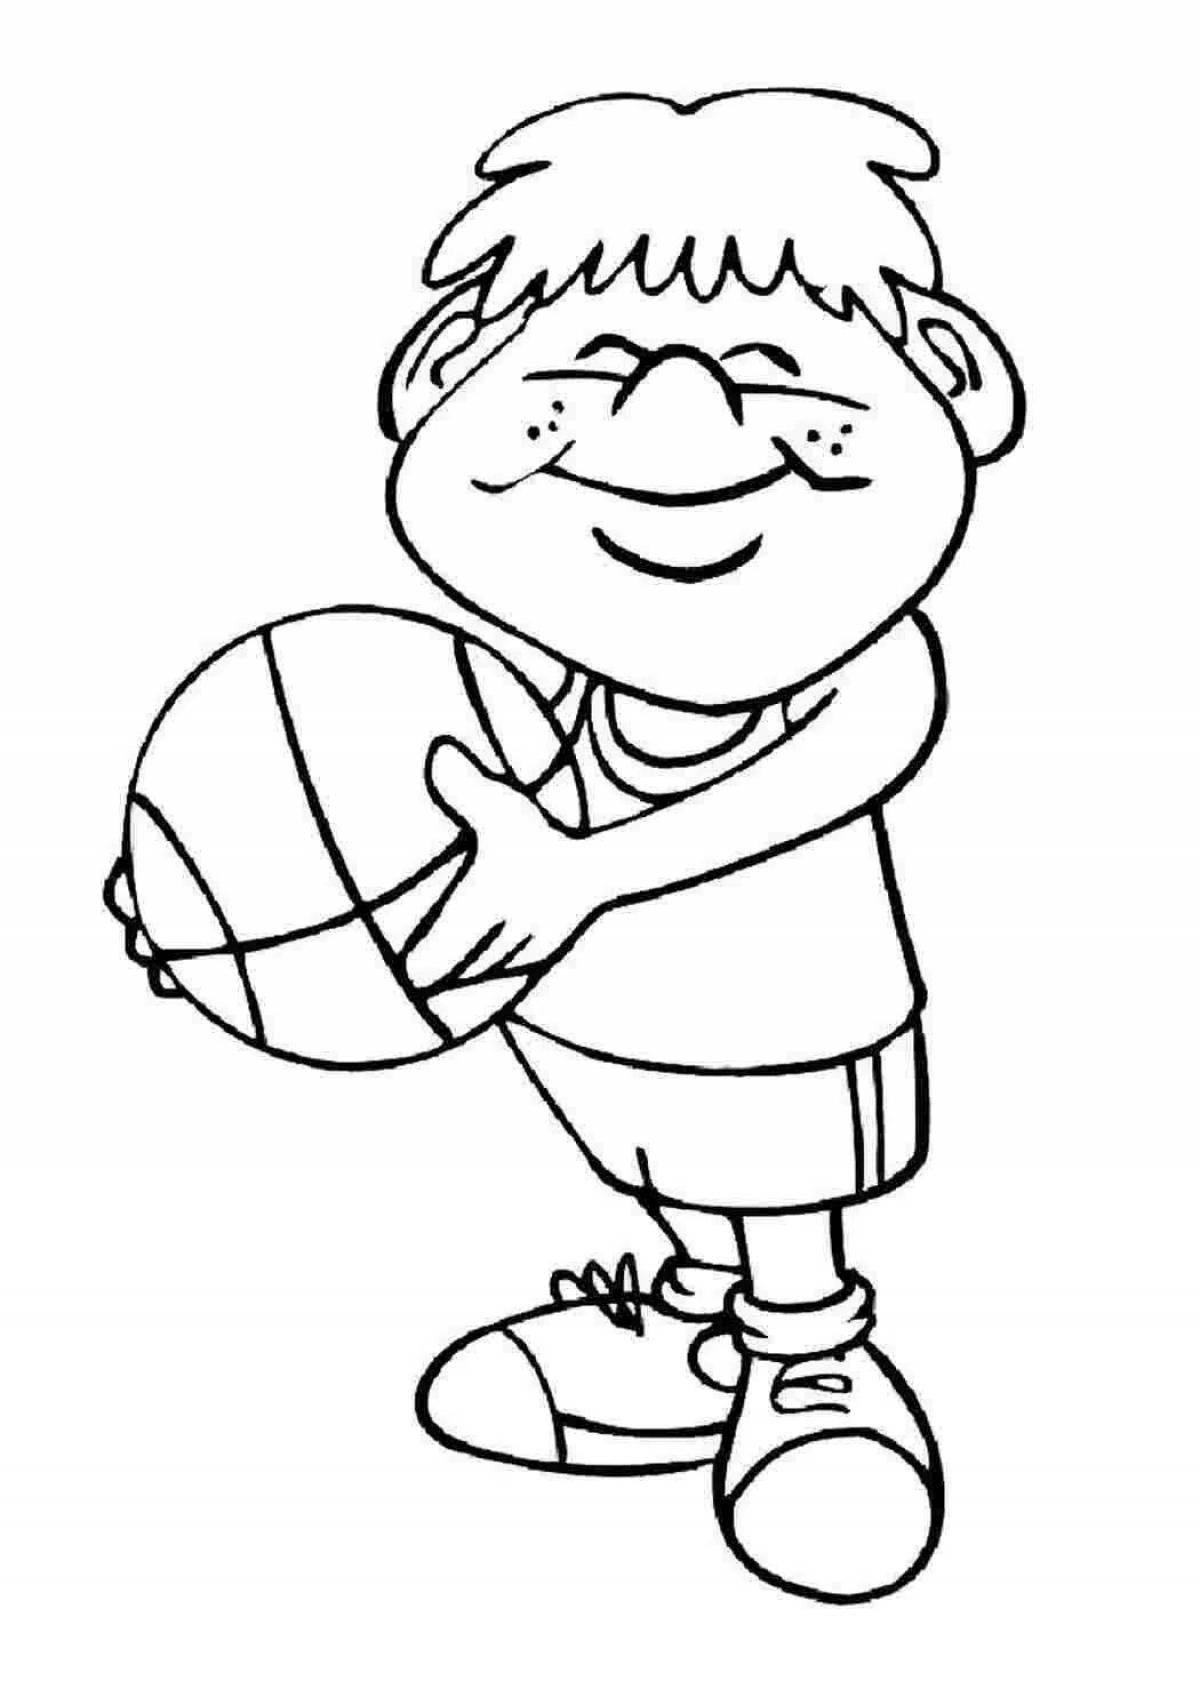 Colorful sportsmen coloring pages for kids